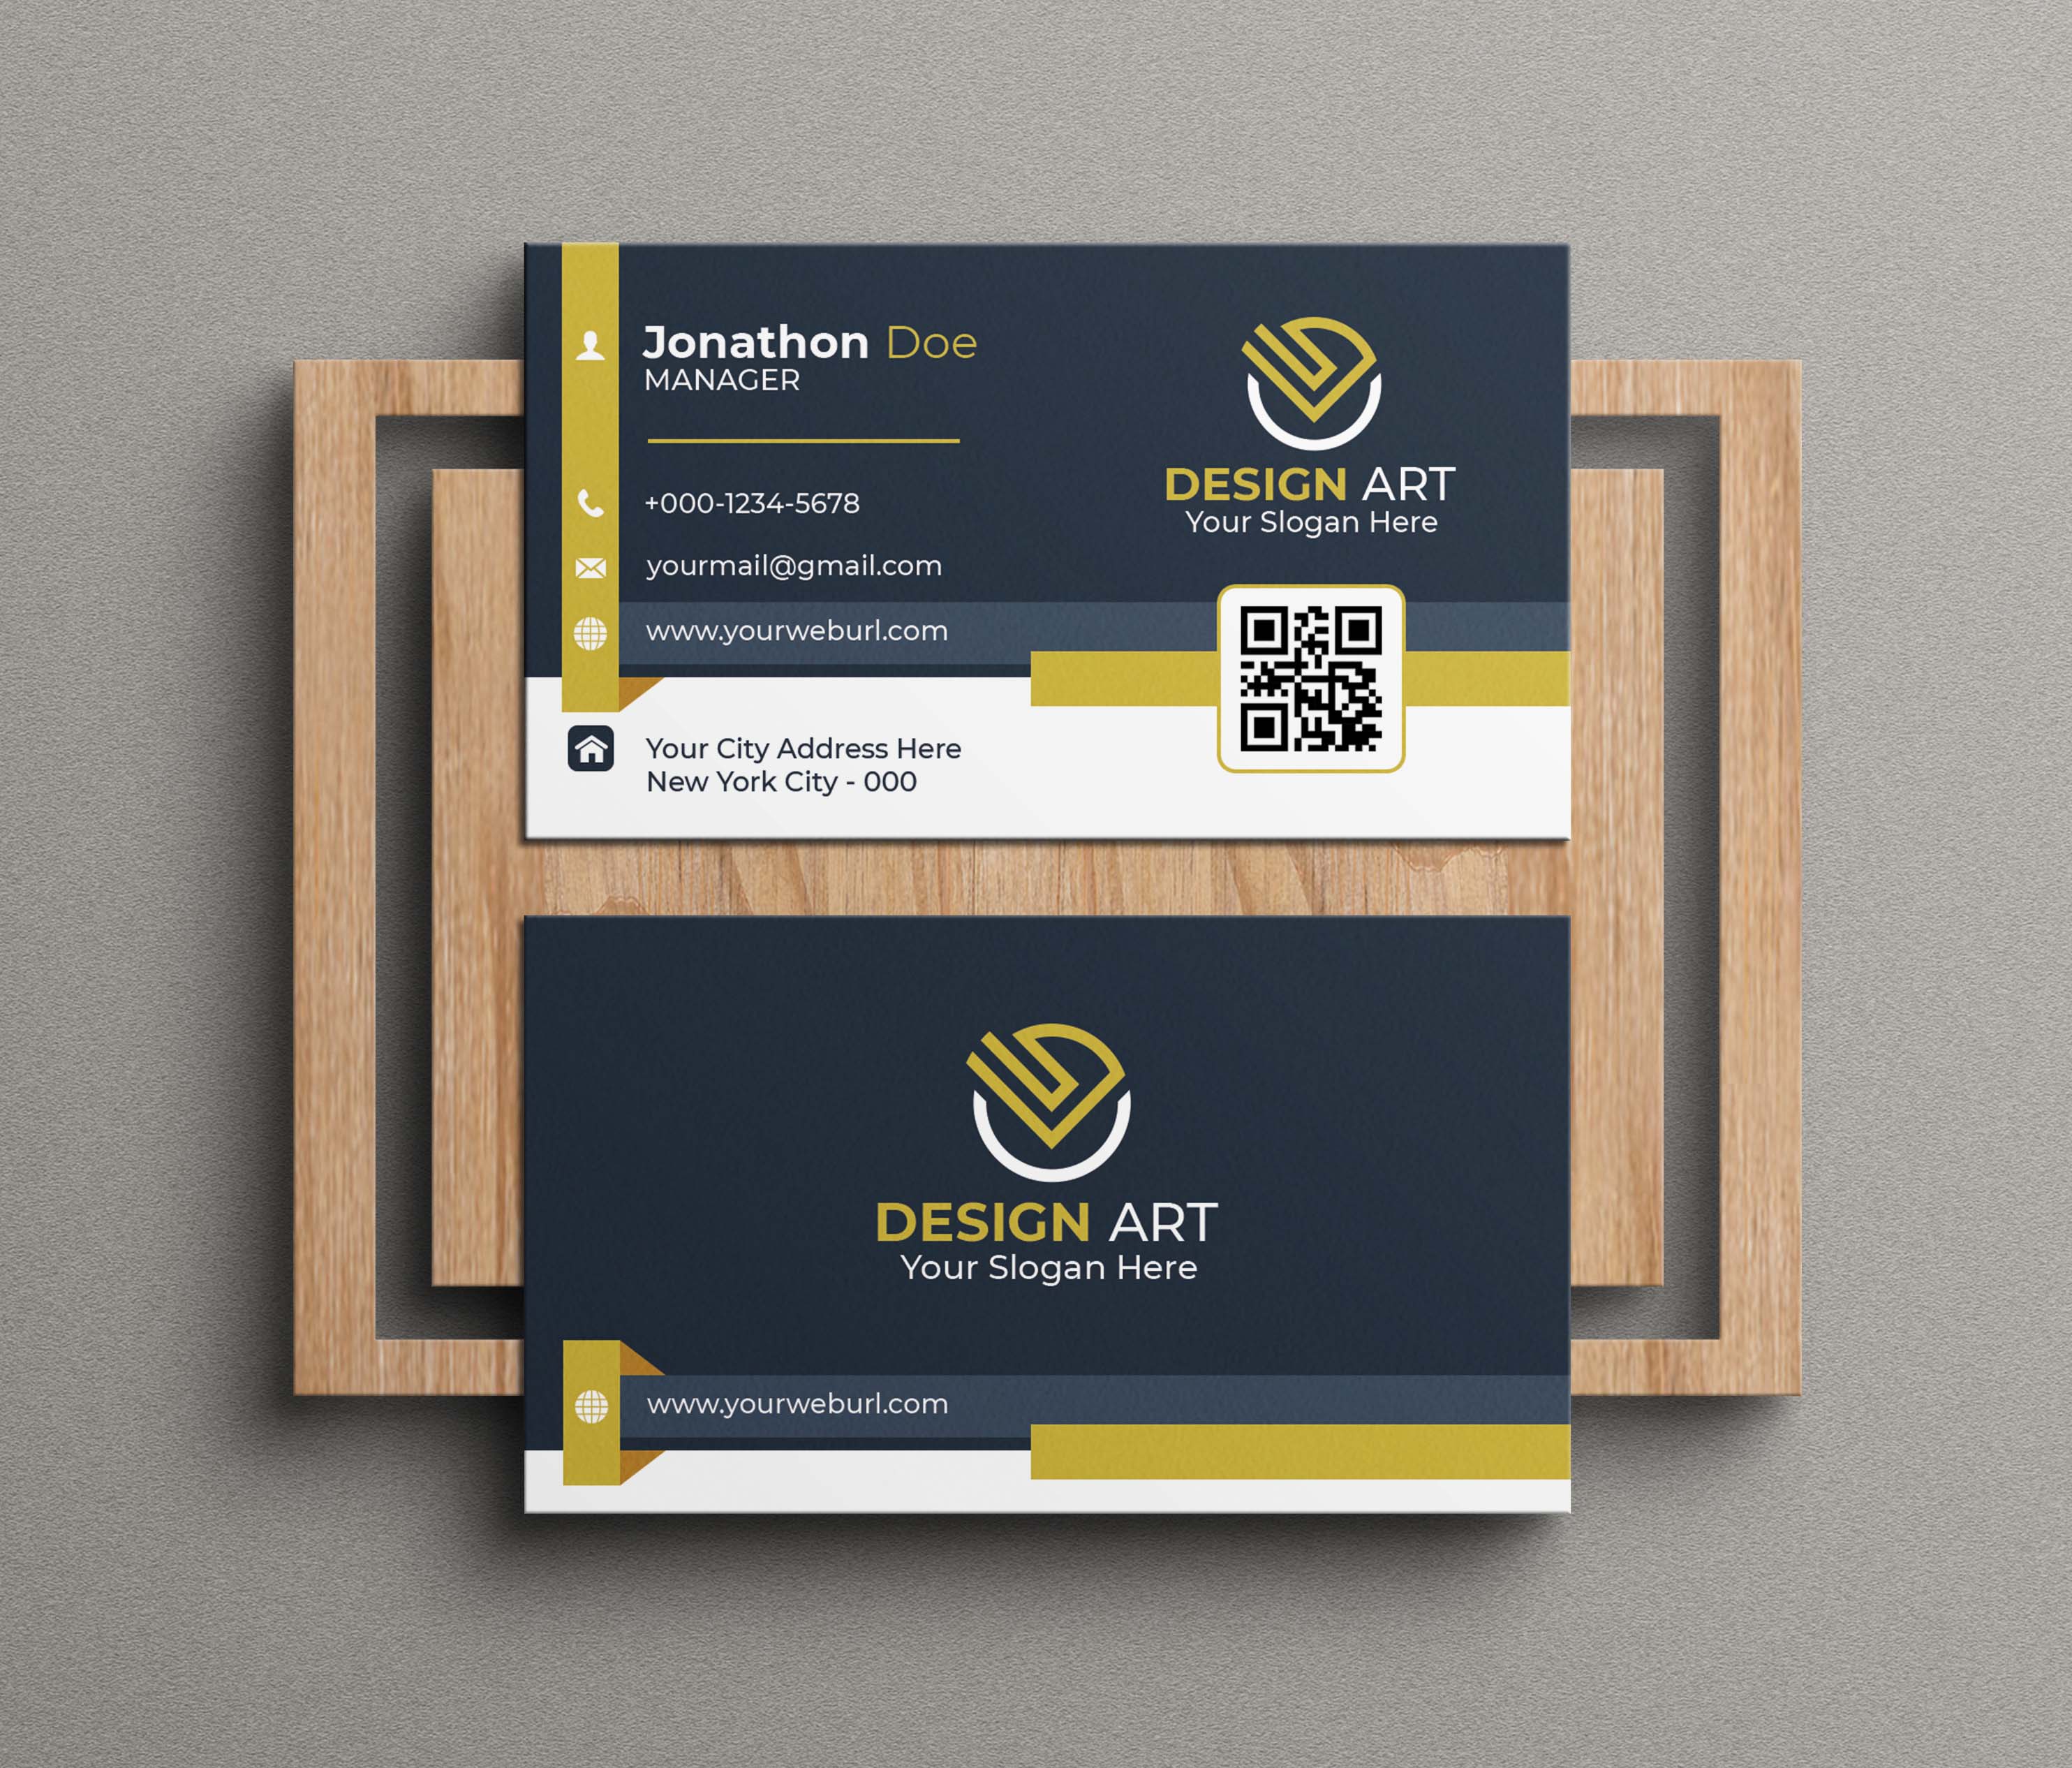 Two business cards with a wooden frame.